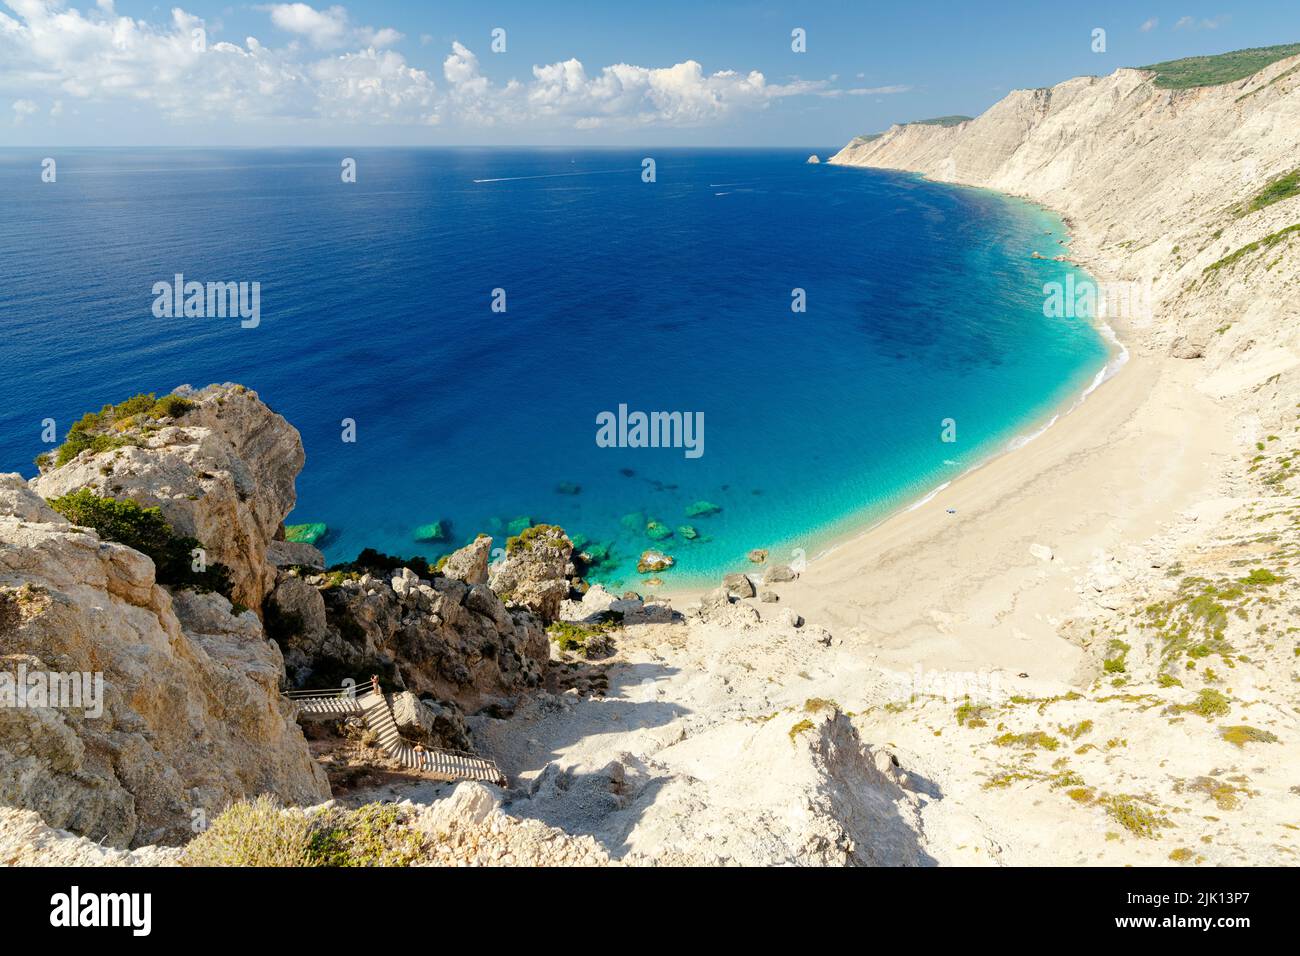 White sand of Ammos beach washed by the crystal turquoise sea, overhead view, Kefalonia, Ionian Islands, Greek Islands, Greece, Europe Stock Photo